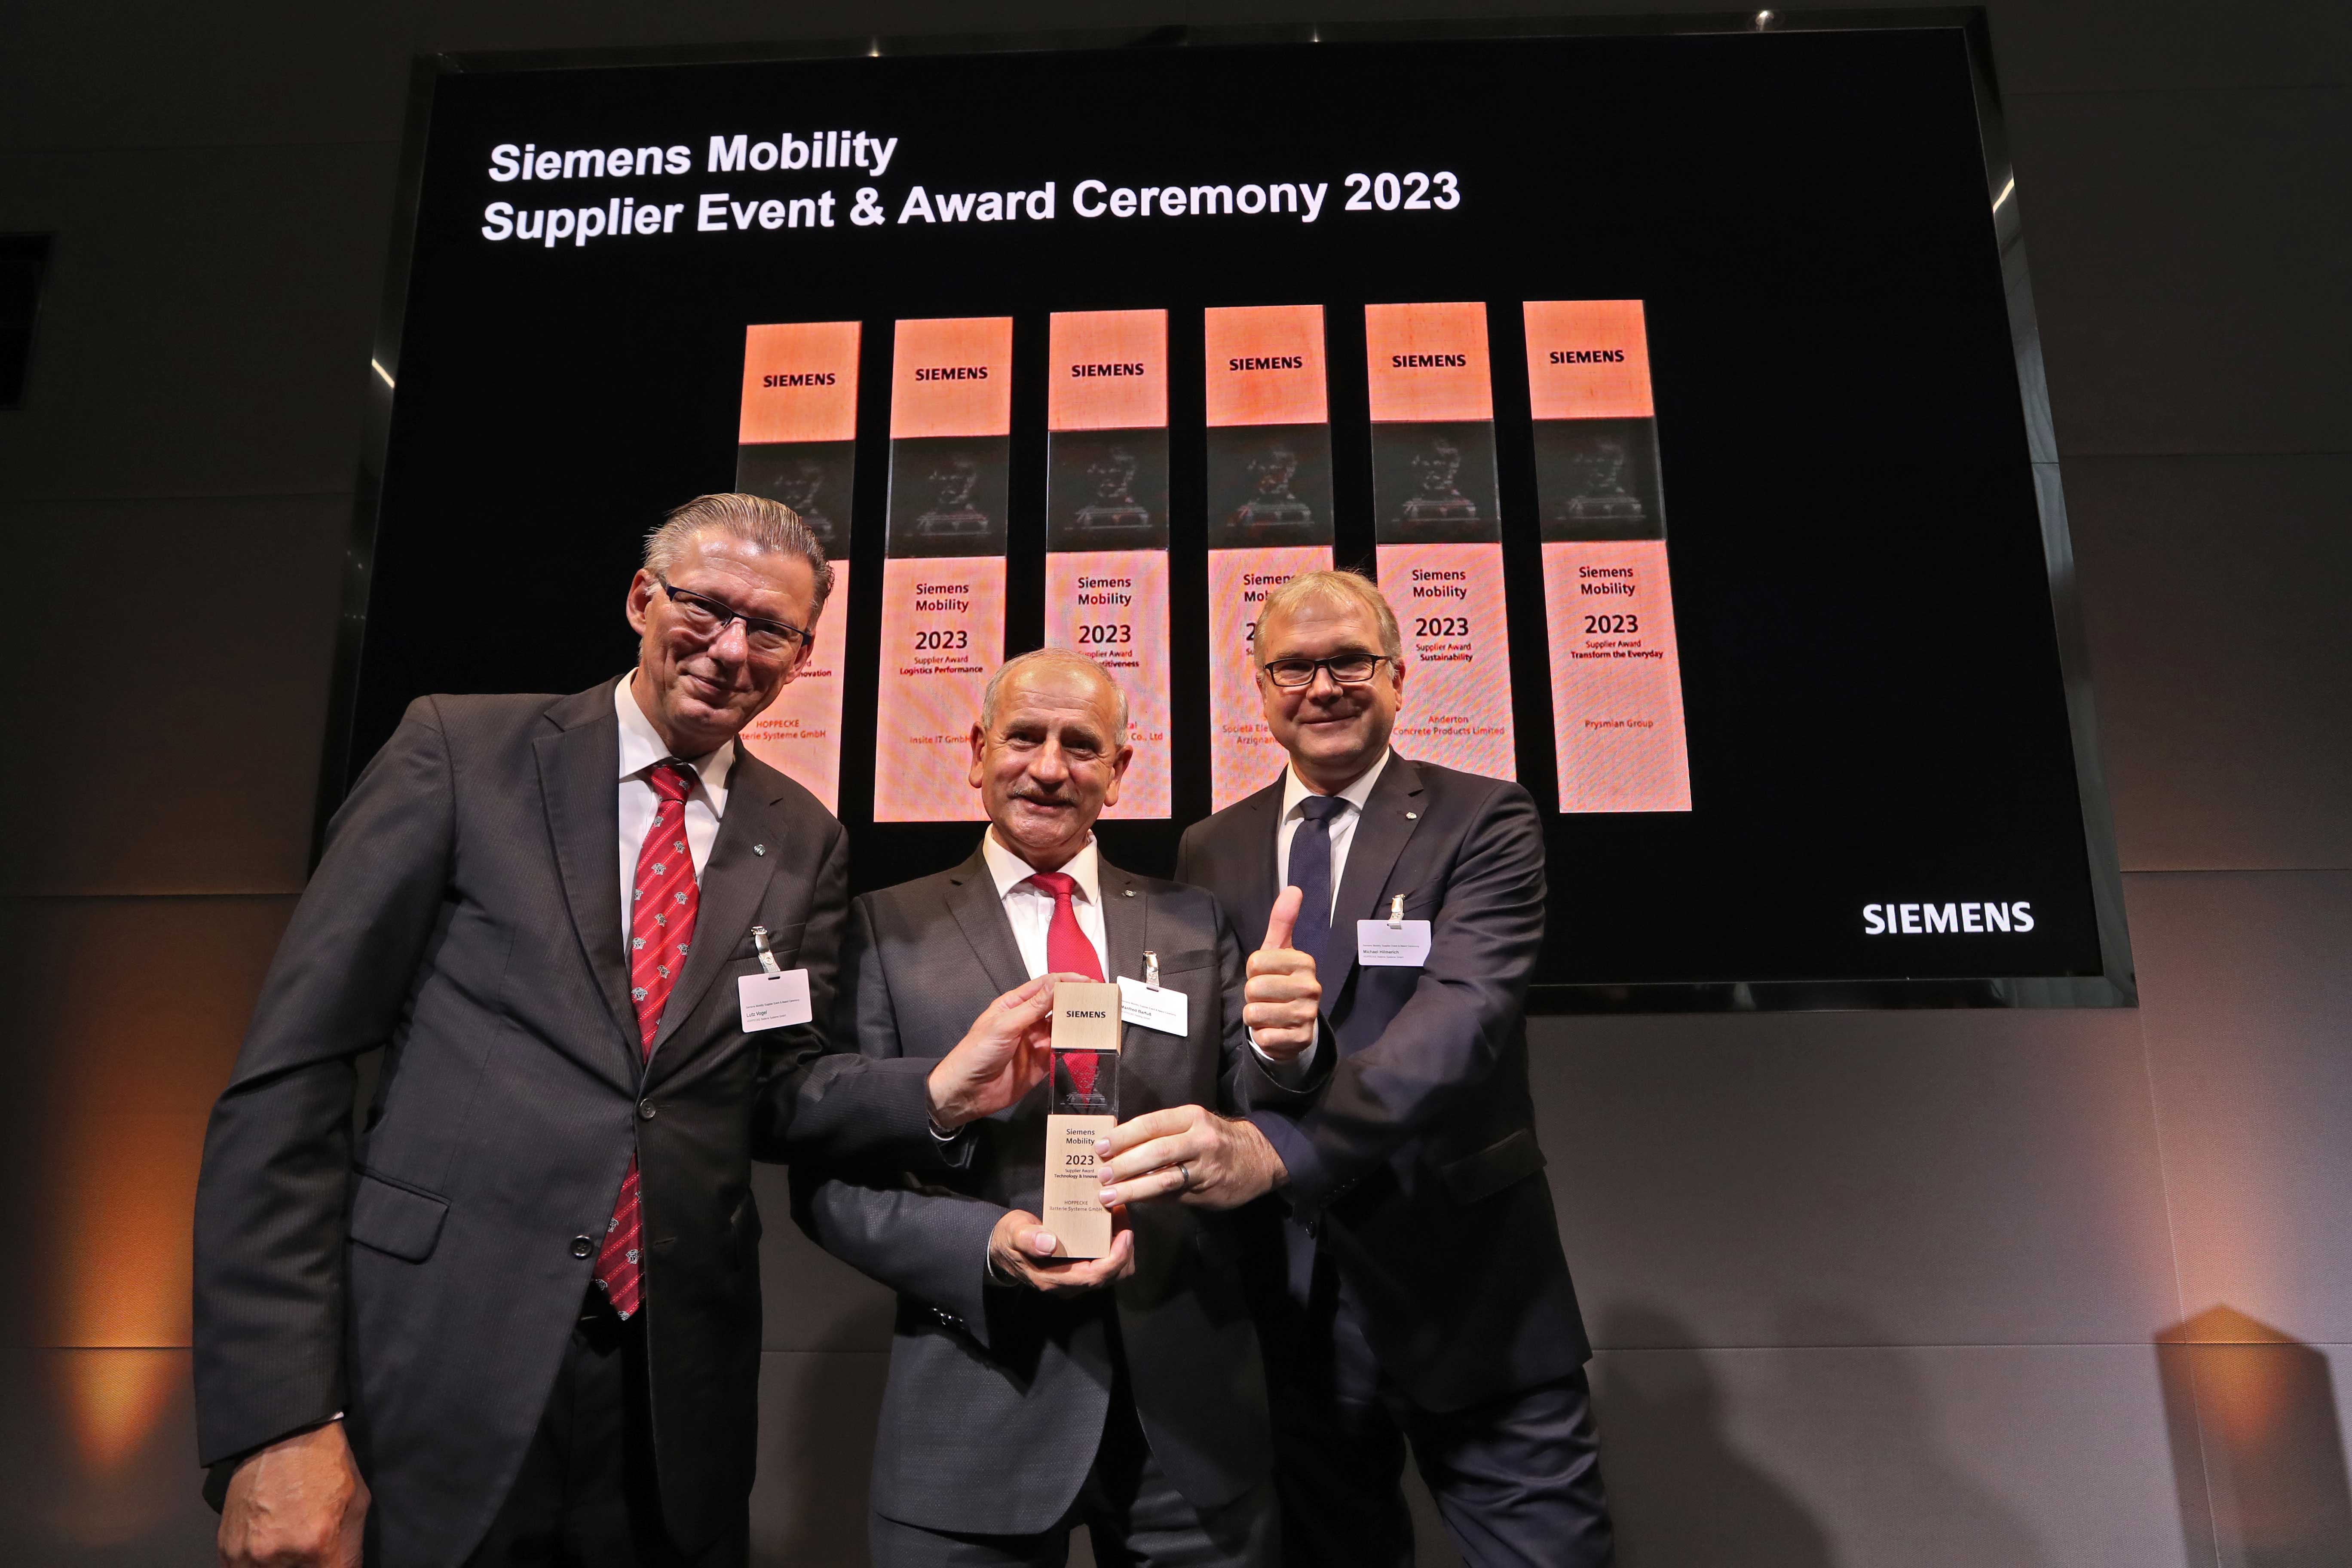 Siemens Mobility honours HOPPECKE with the Technology and Innovation Award  - Wednesday, 25.10.2023